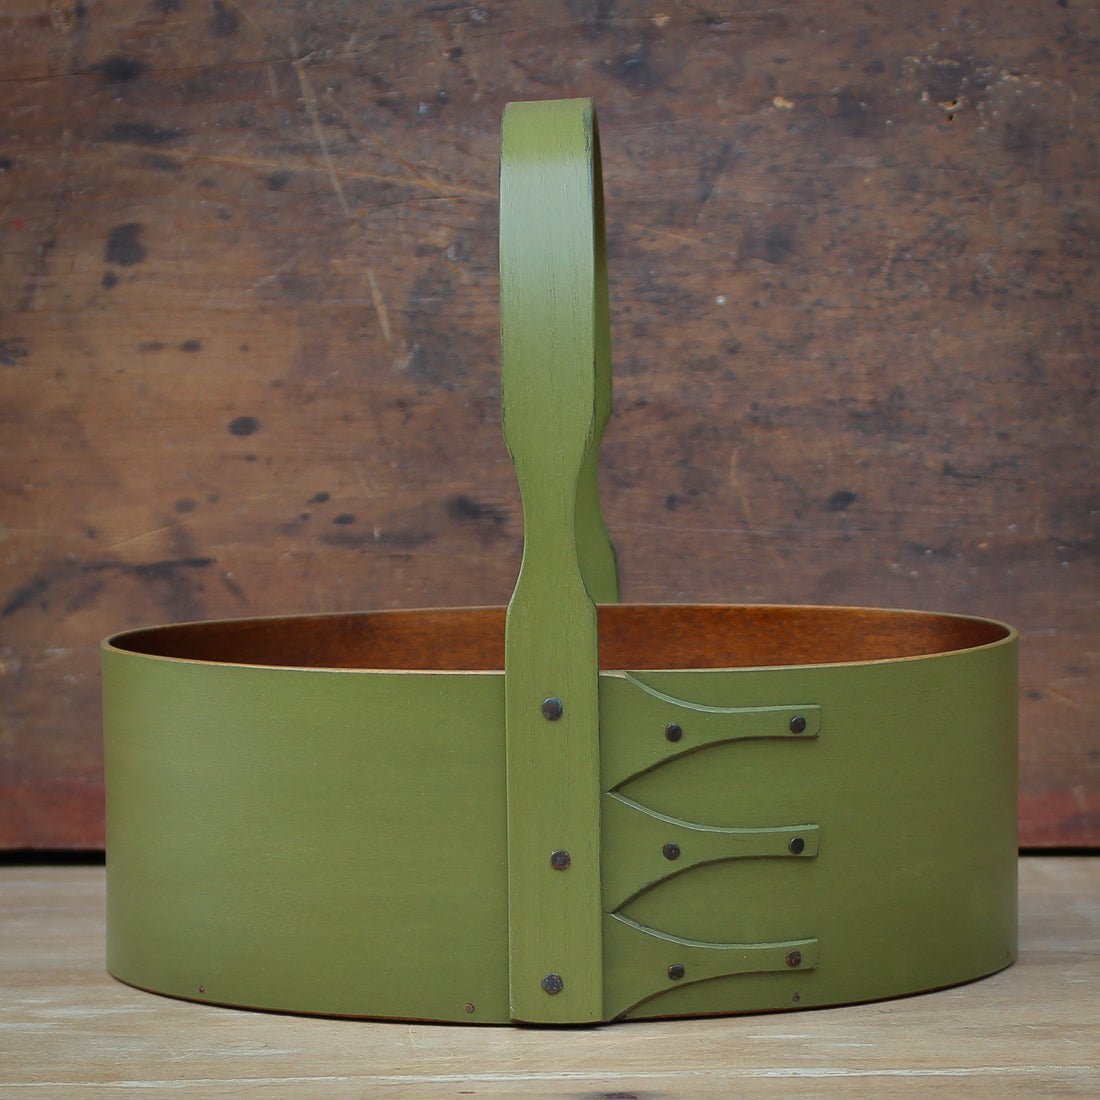 Shaker Carrier, Size #4, LeHays Shaker Boxes, Handcrafted in Maine, Green Milk Paint Finish, Front View